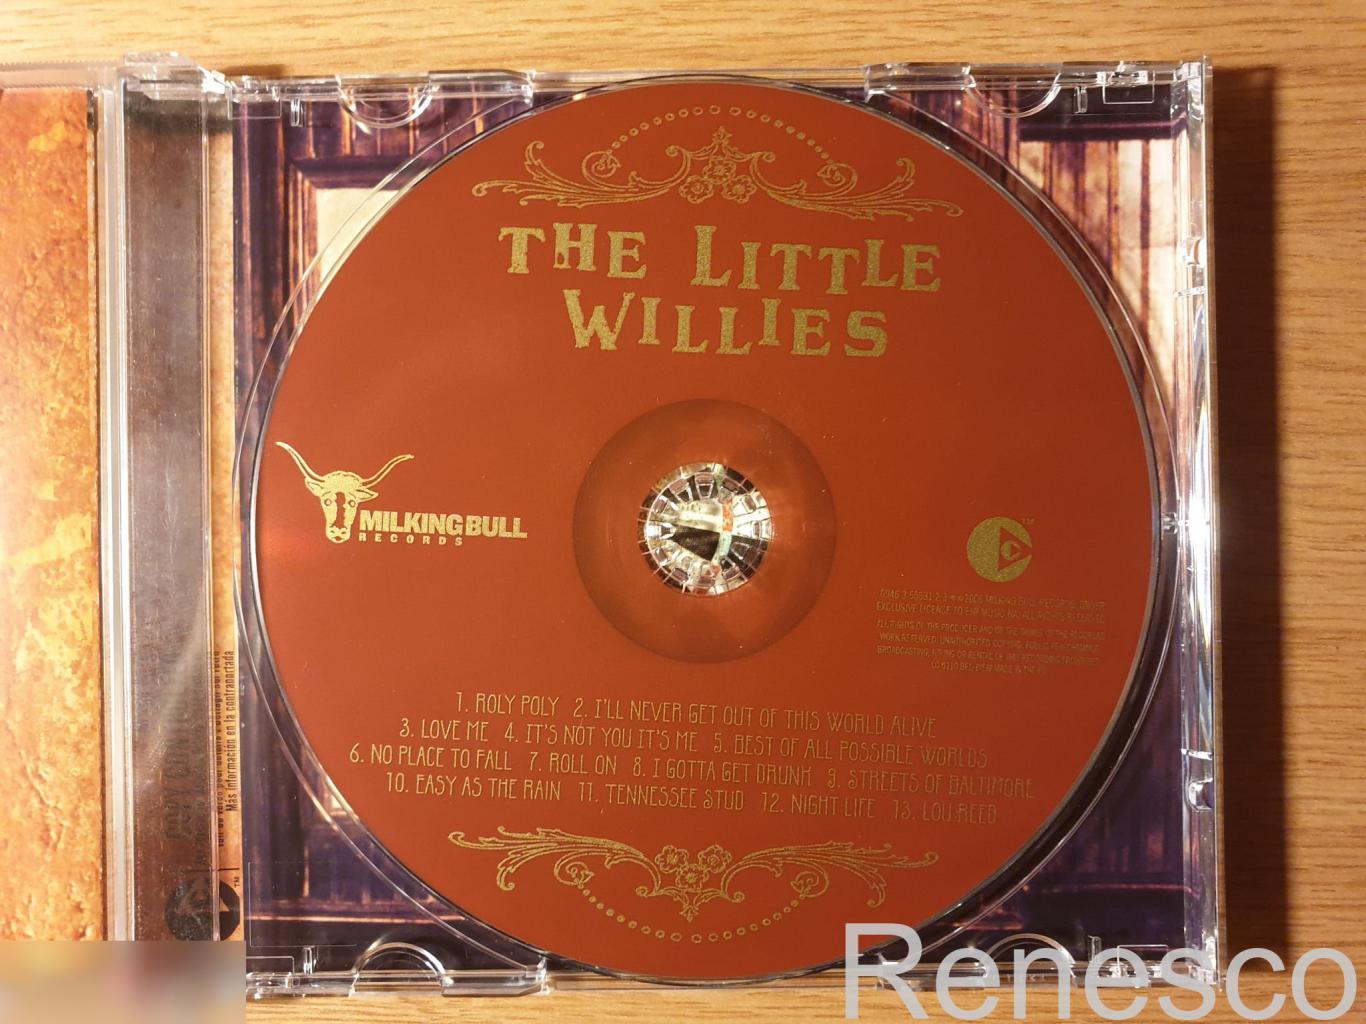 (CD) The Little Willies ?– The Little Willies (2006) (Europe) 4